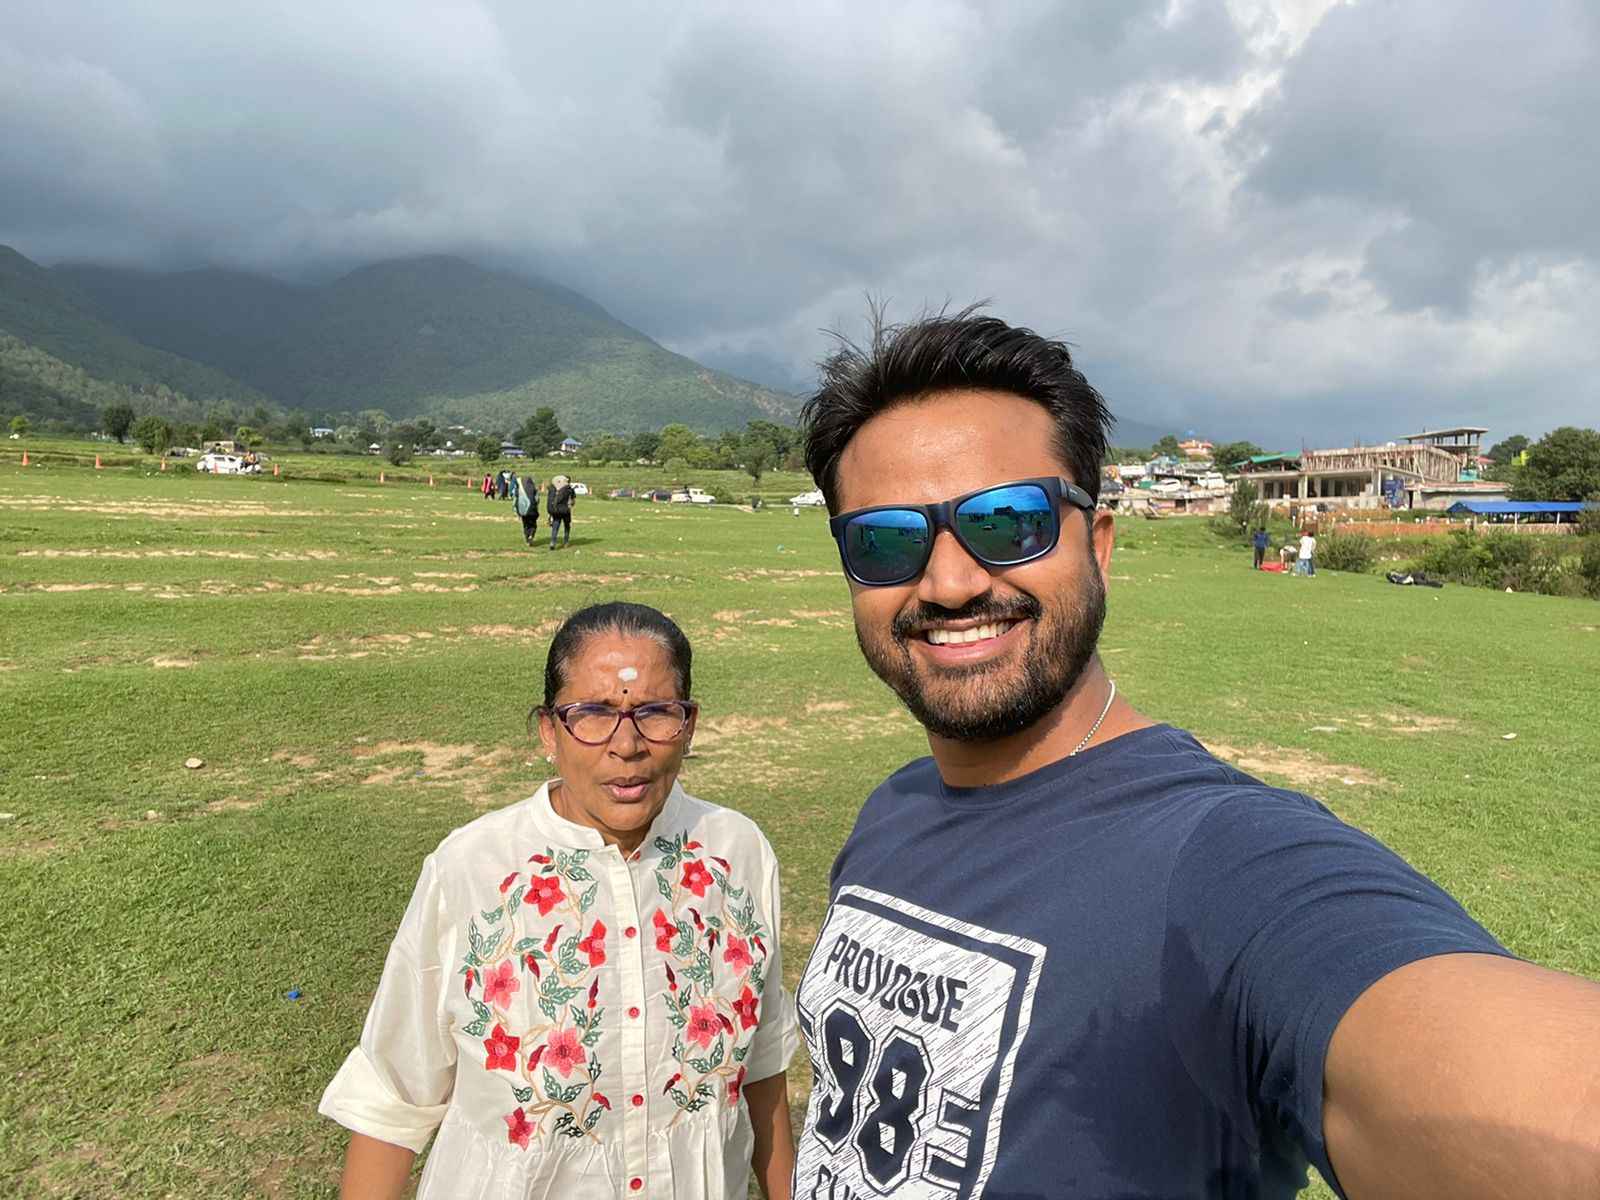 Subha Surianarayanan and her son Venkatesh, the travelling mother-son duo